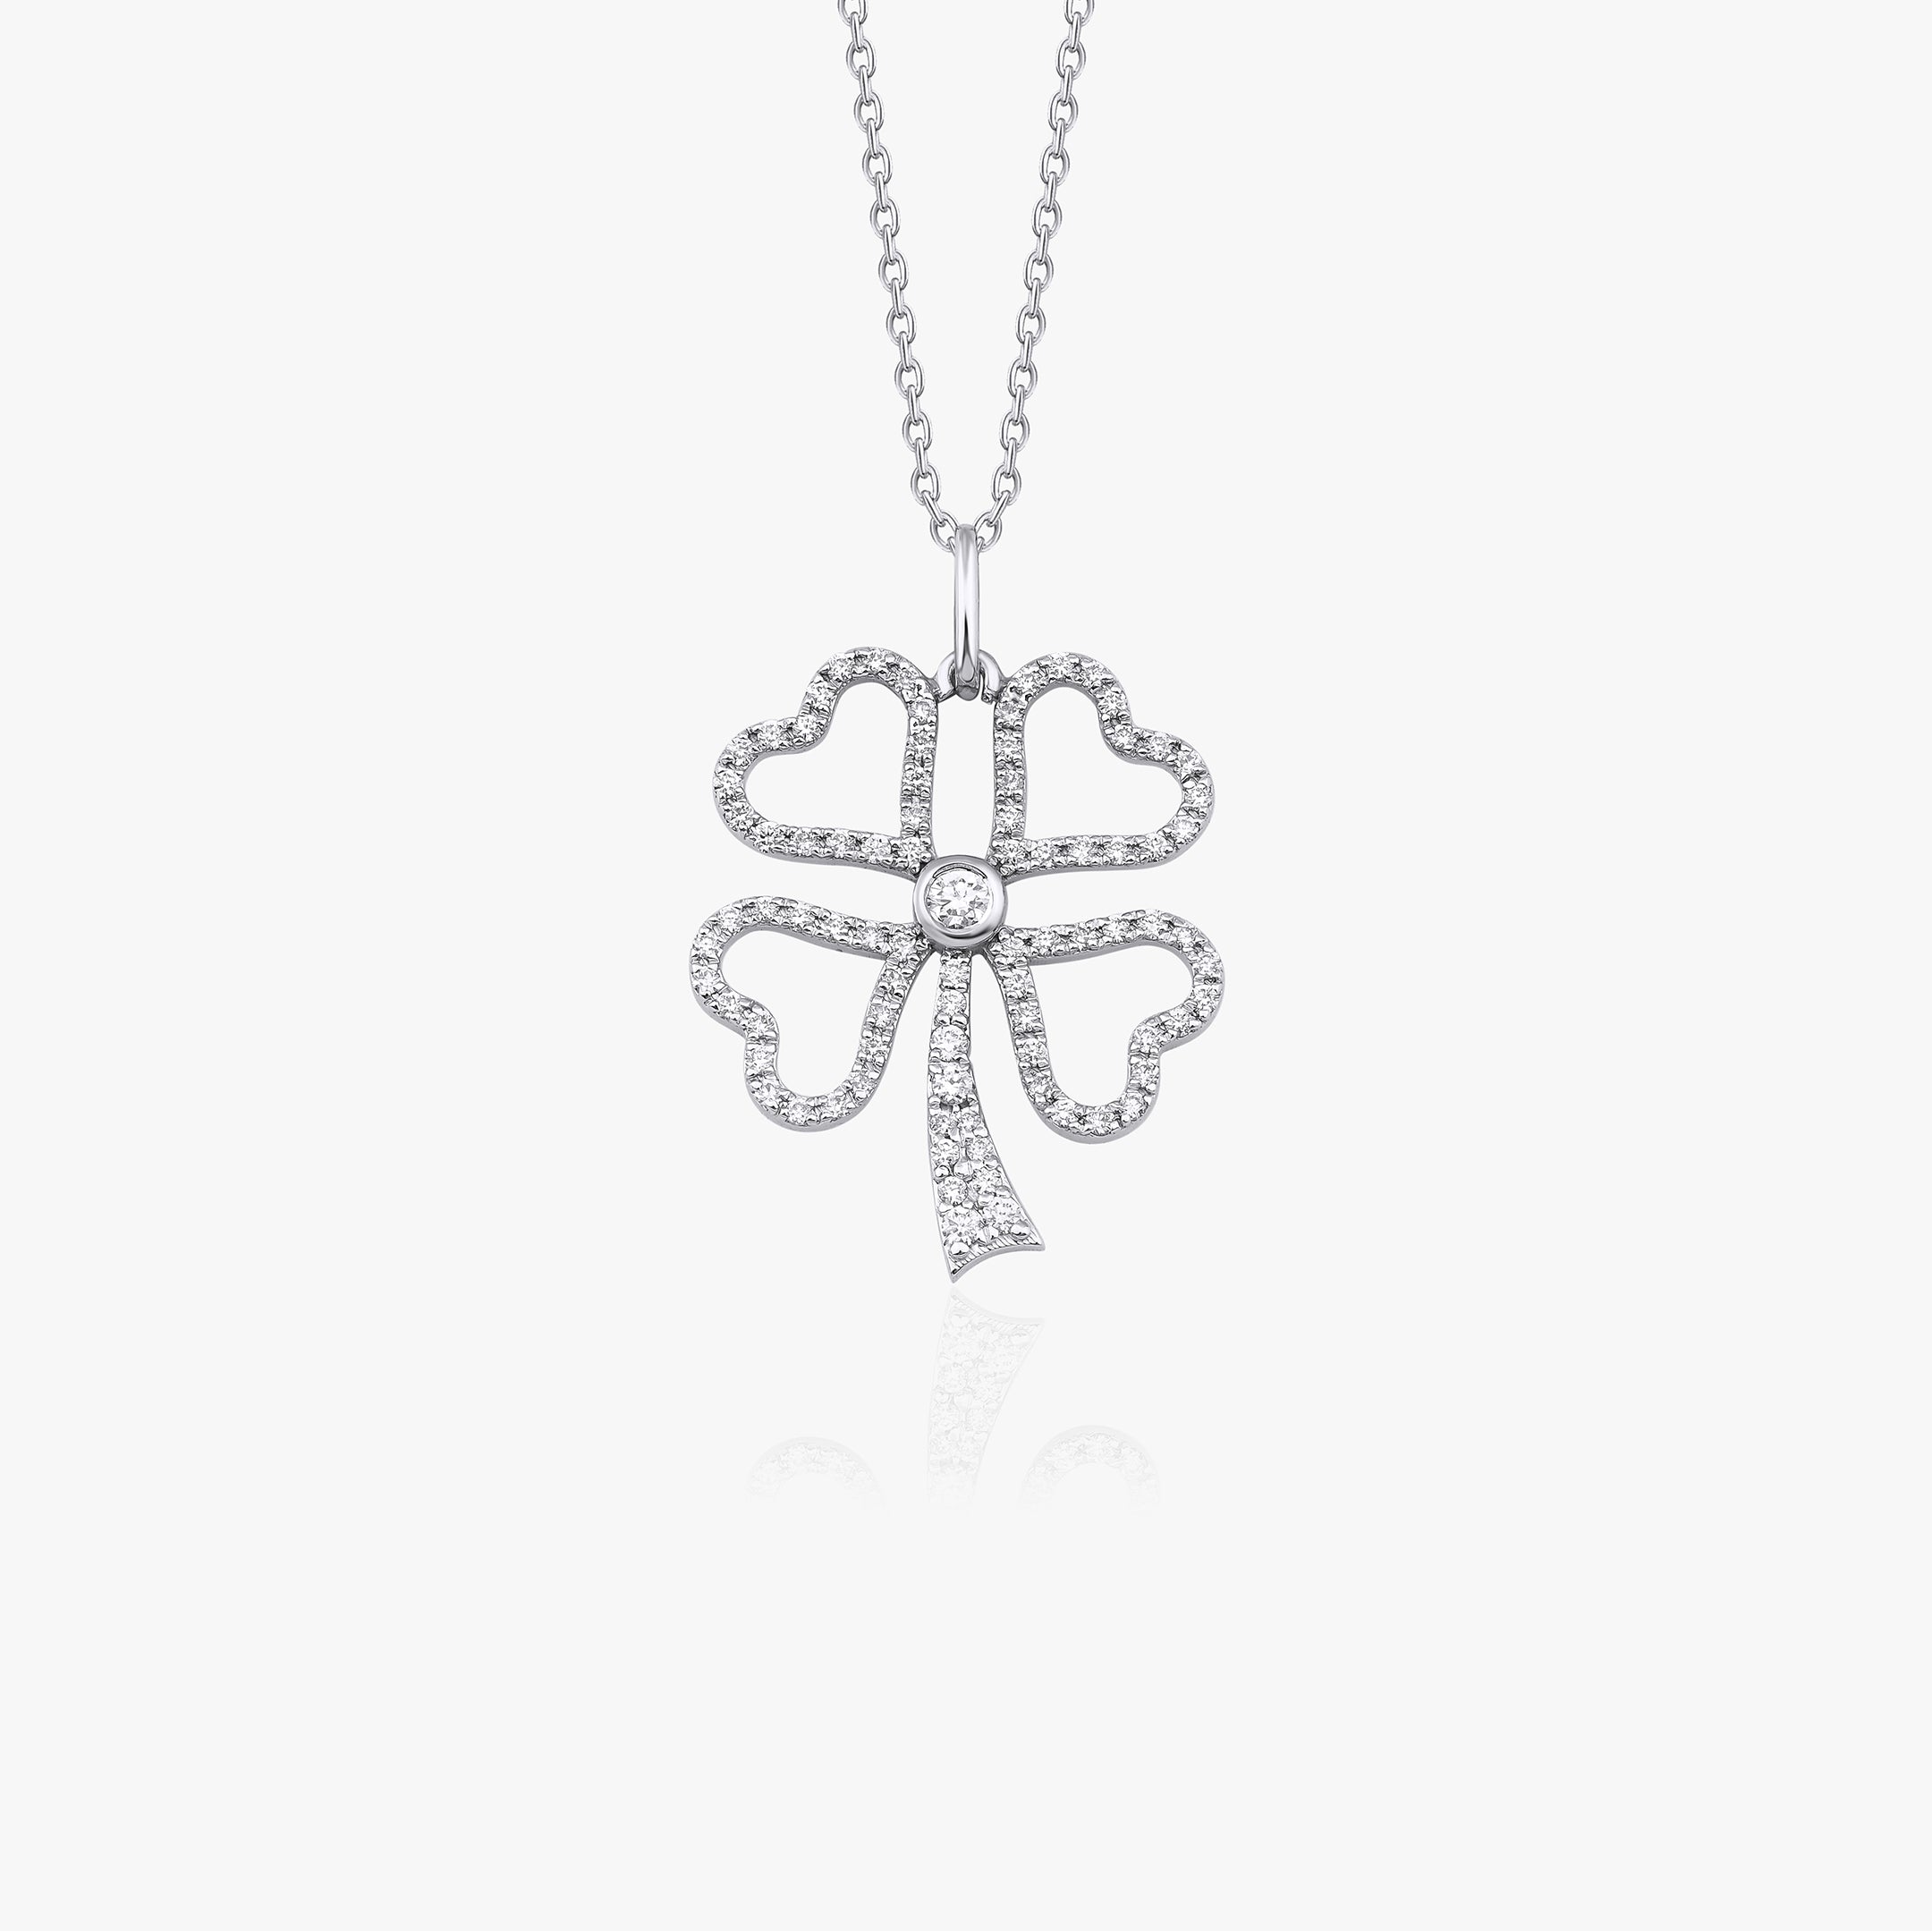 Diamond Clover Necklace Available in 14K and 18K Gold / FORTUNA